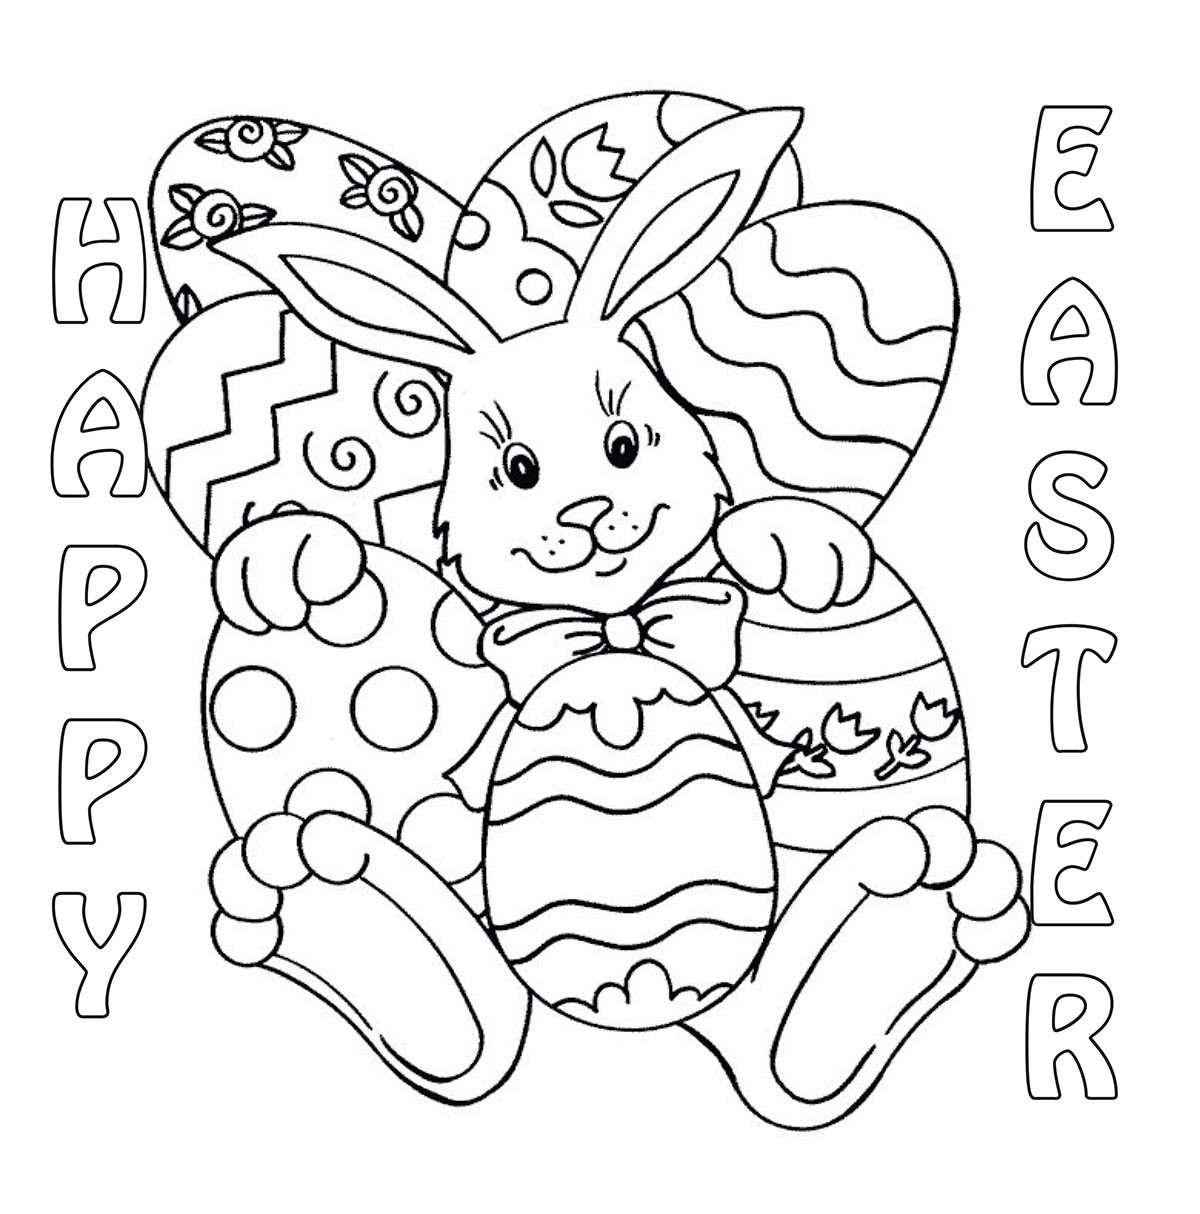 Printable Coloring Pages For Boys Pdf
 March 2014